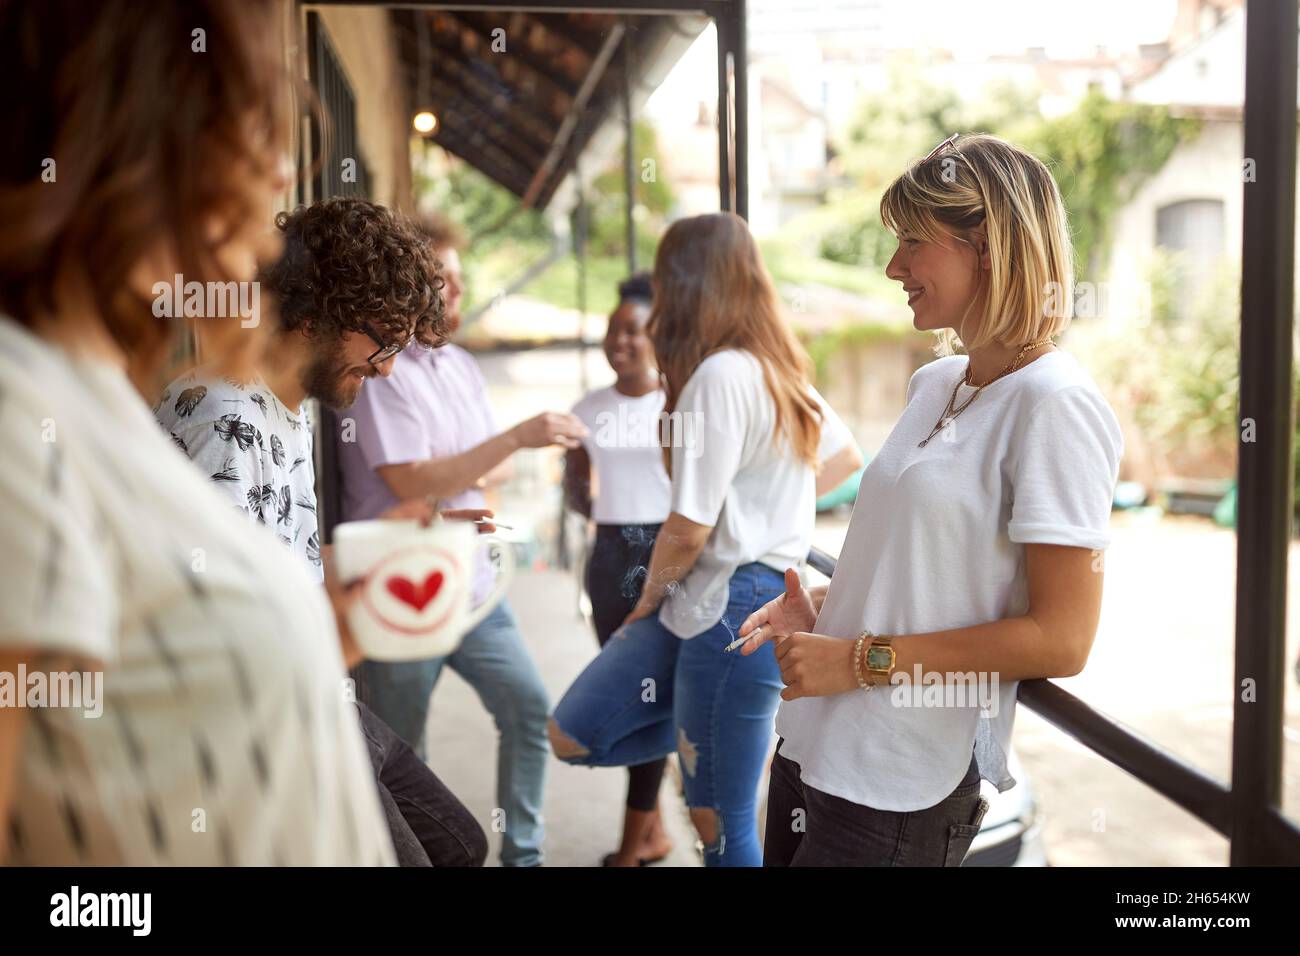 group of young adult people having a break at work, standing outdoor, smoking cigarettes, drinking coffee, talking, smiling Stock Photo